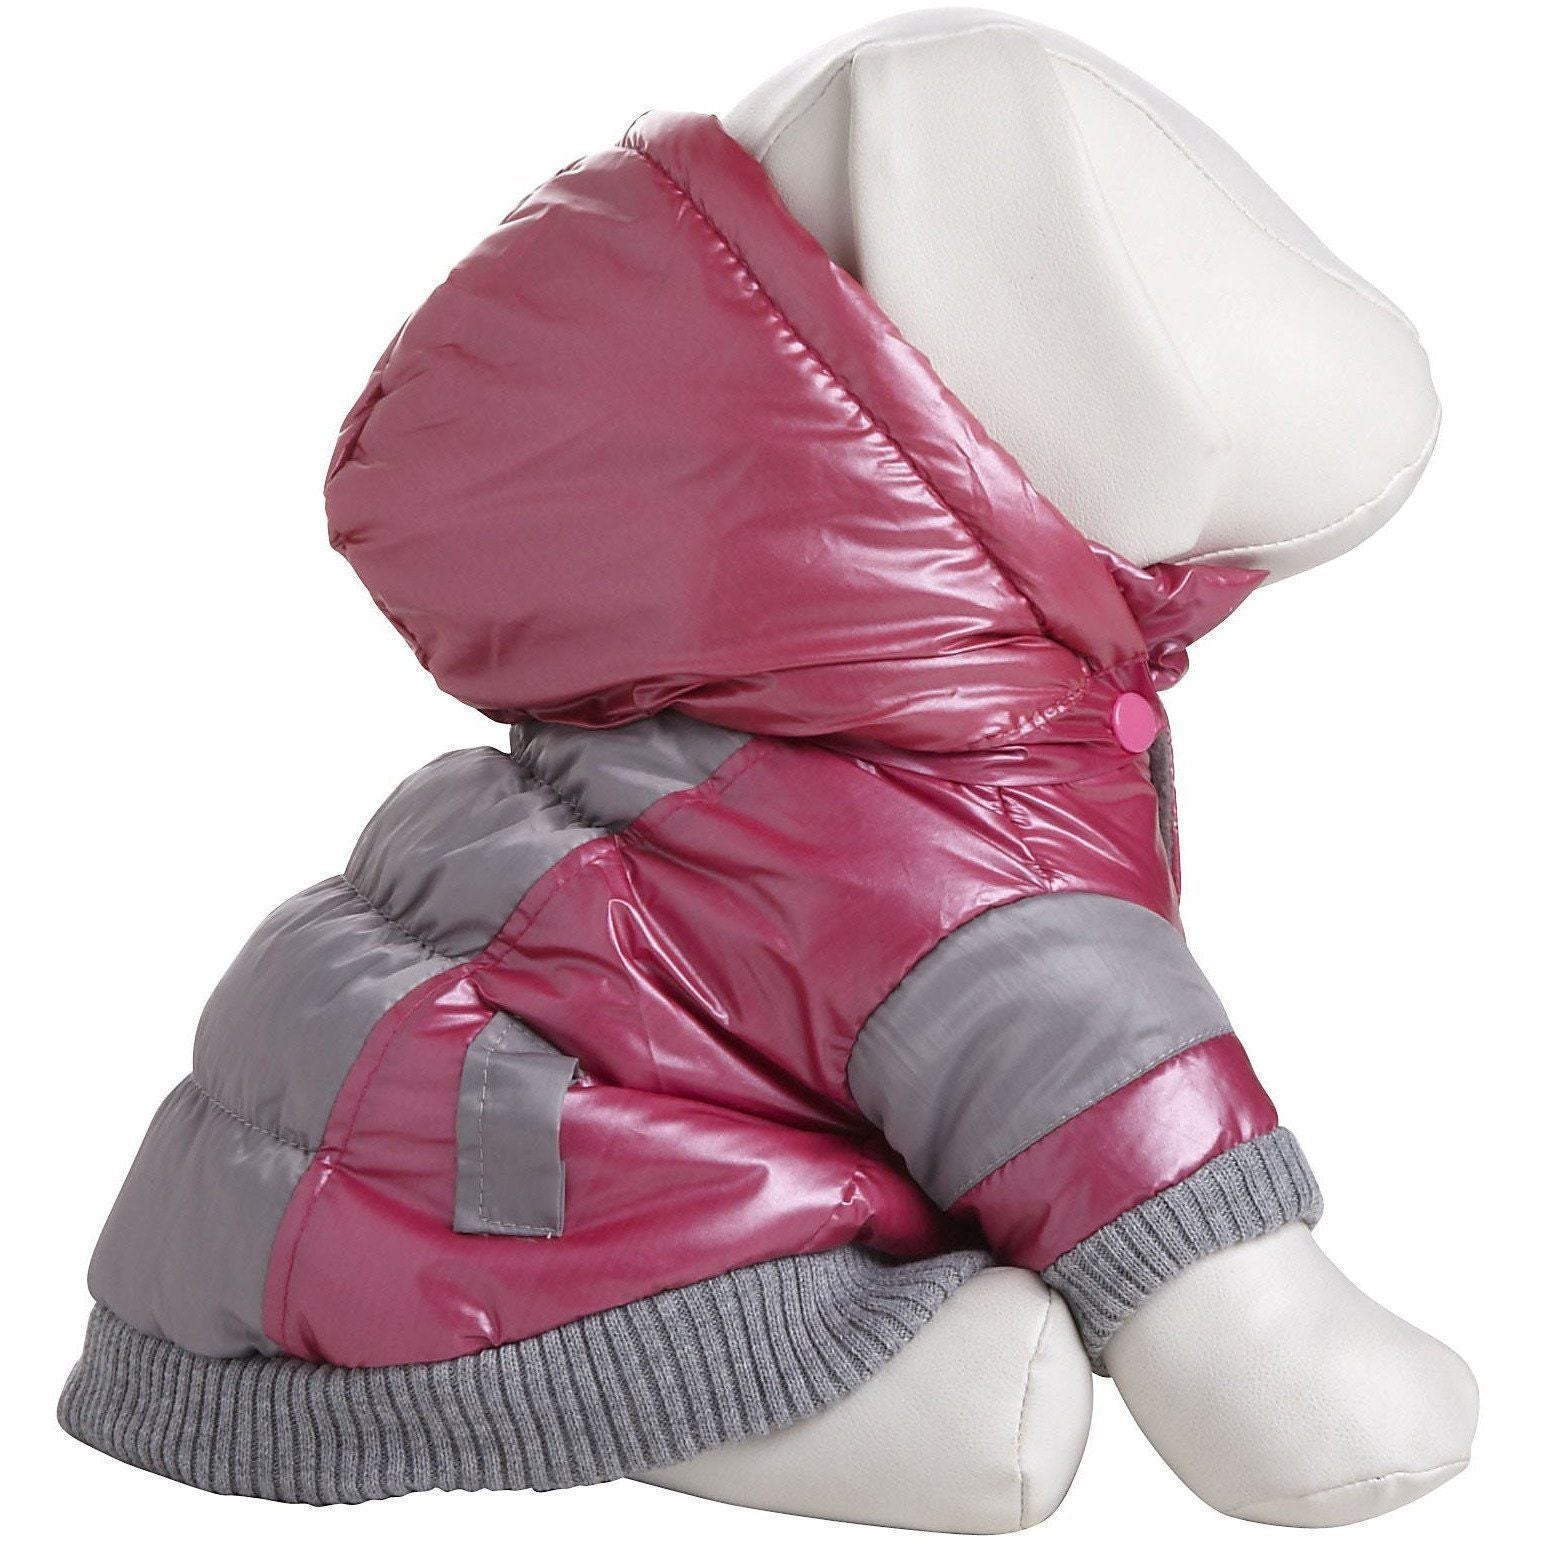 Pet Life ® 'Vintage Aspen' 3M Insulated Sporty Ski Dog Jacket w/ Removable Hood X-Small Pink